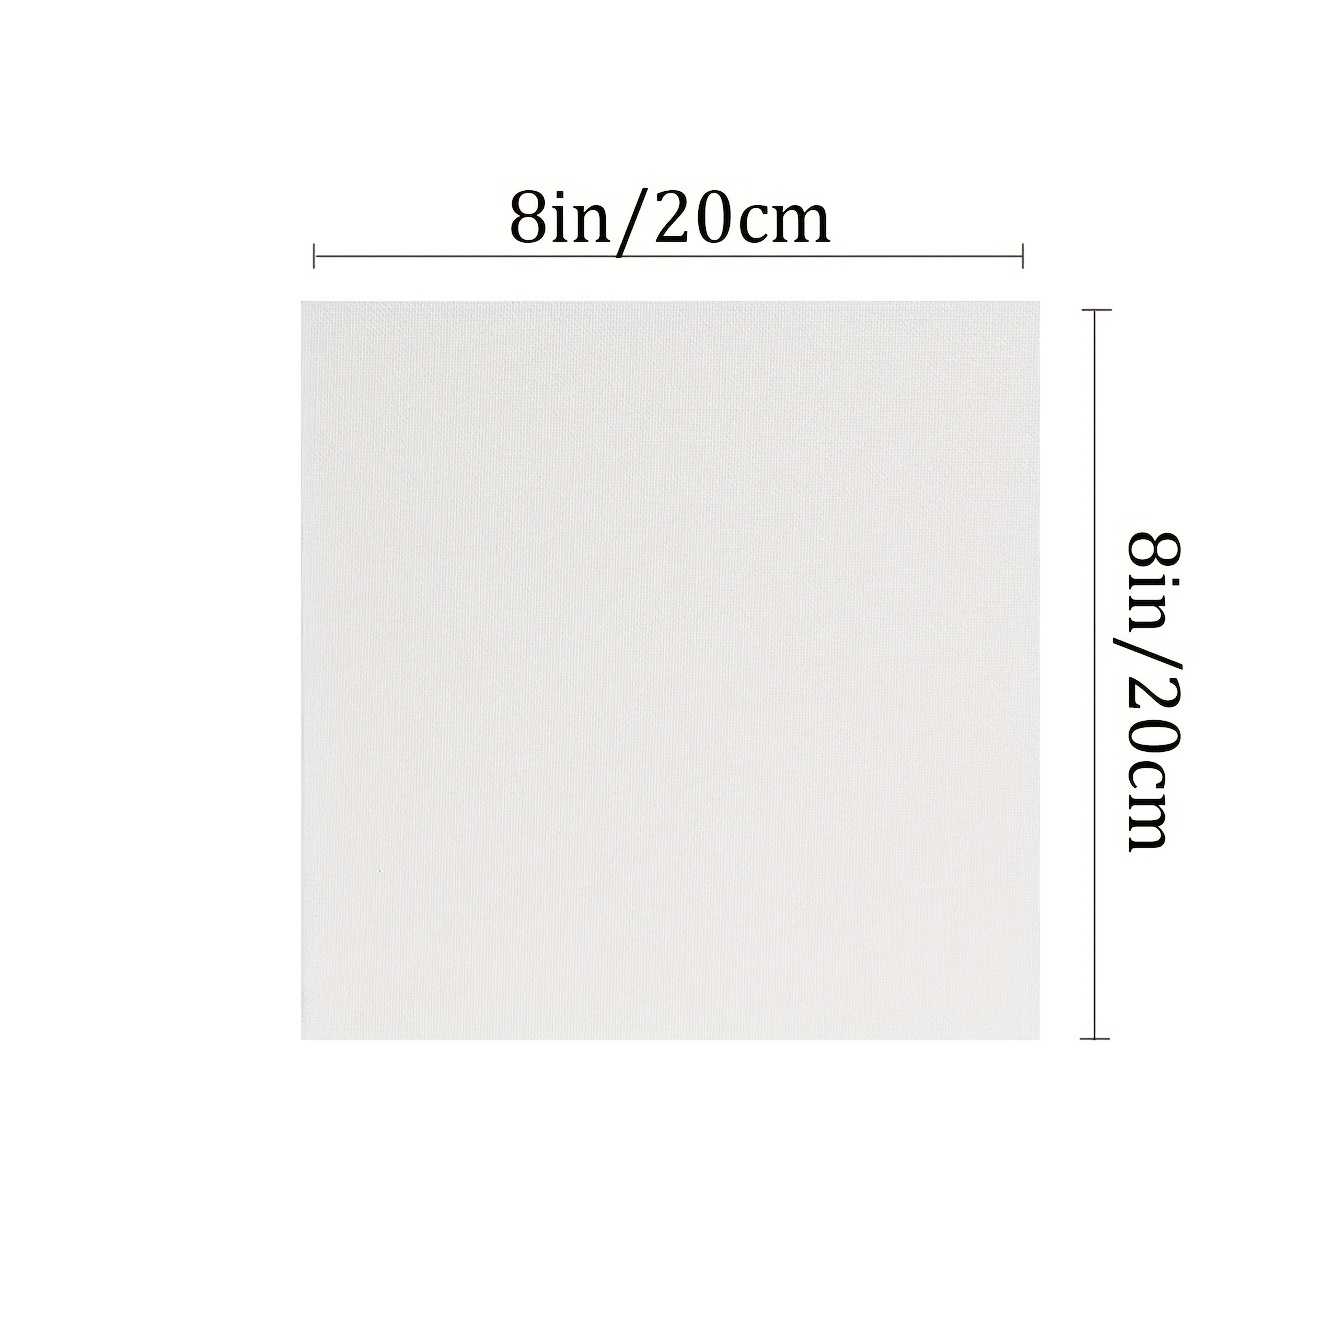 Painting Canvas 8x8 Inches, Pack Of 1 ,100% Cotton Acid Free Canvases For  Painting, White Blank Flat Canvas Boards For Acrylic, Oil, Watercolor & Past